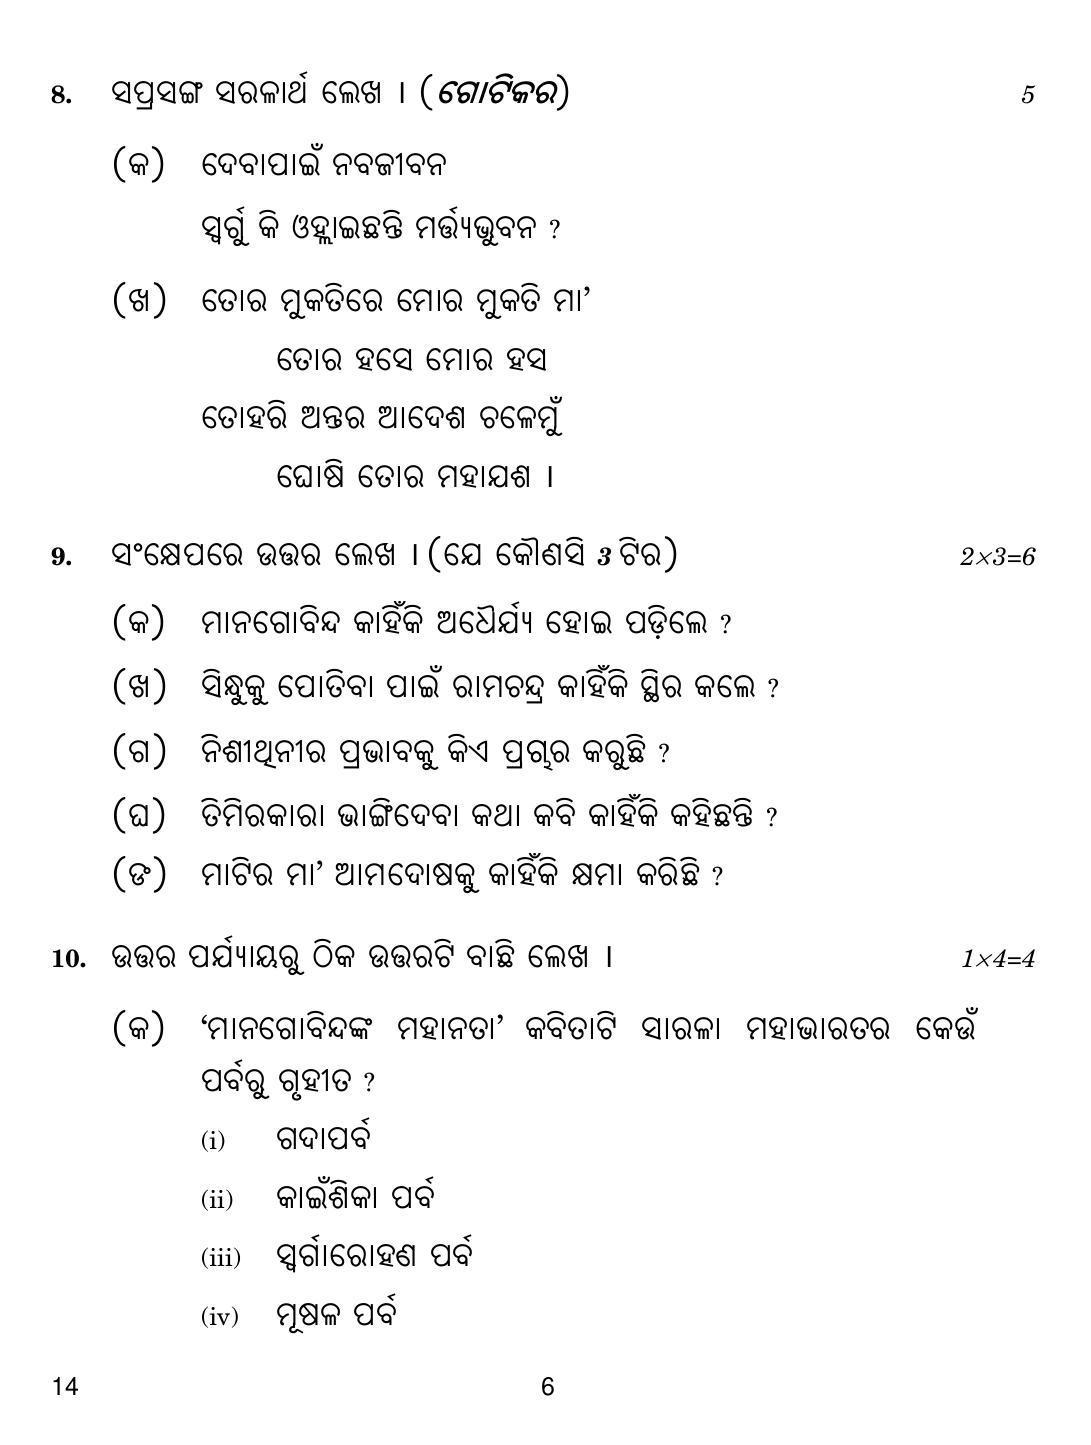 CBSE Class 10 14 Odia 2019 Question Paper - Page 6